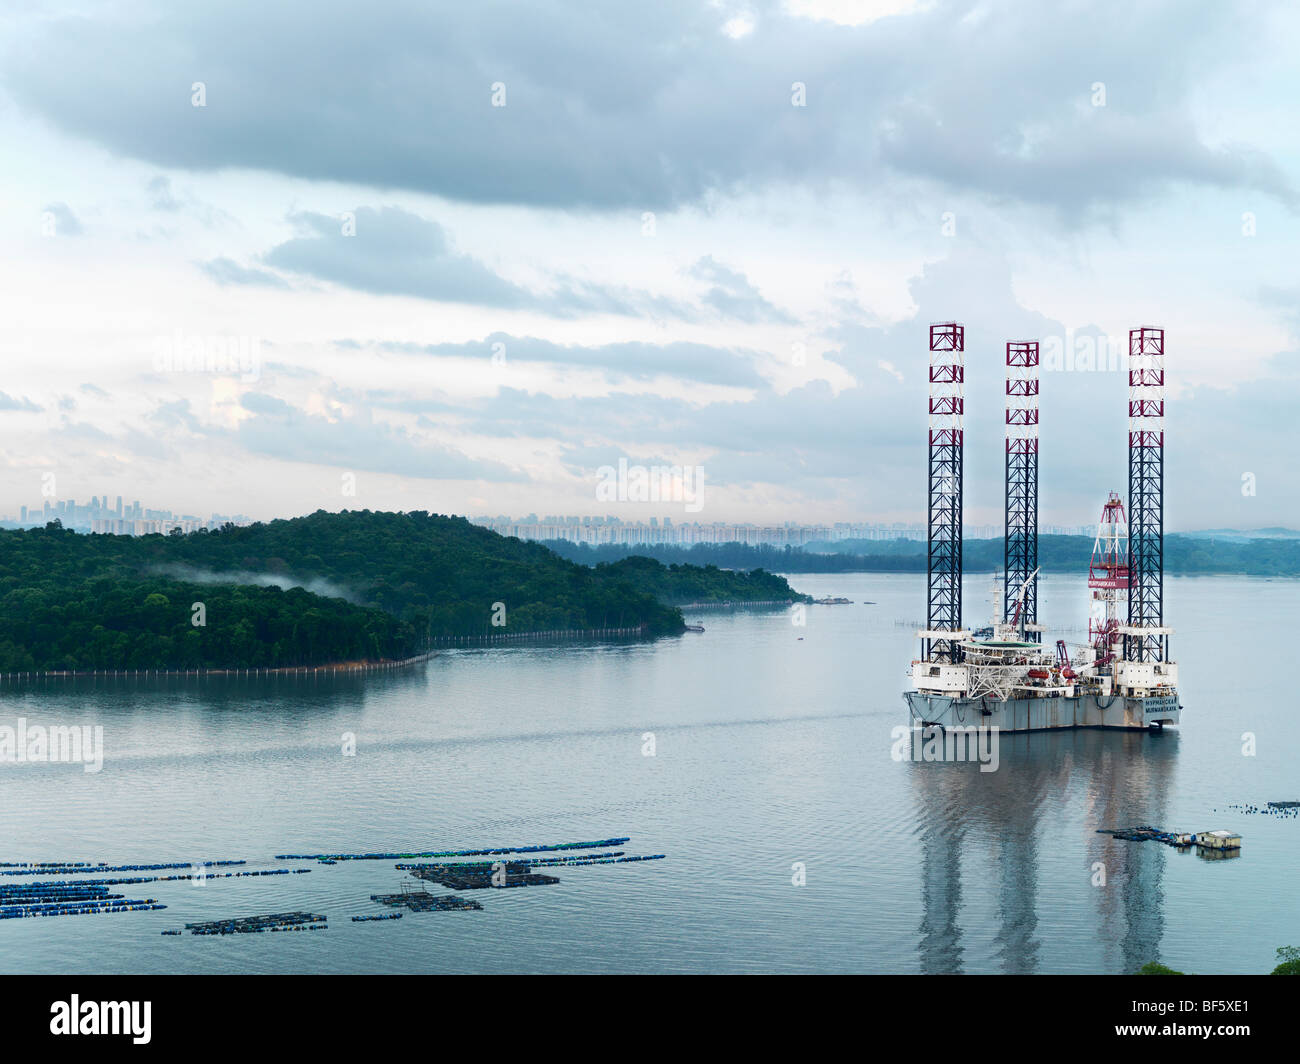 A scenic view of an oil rig located along side a fish farm off of Johor's coast. Stock Photo